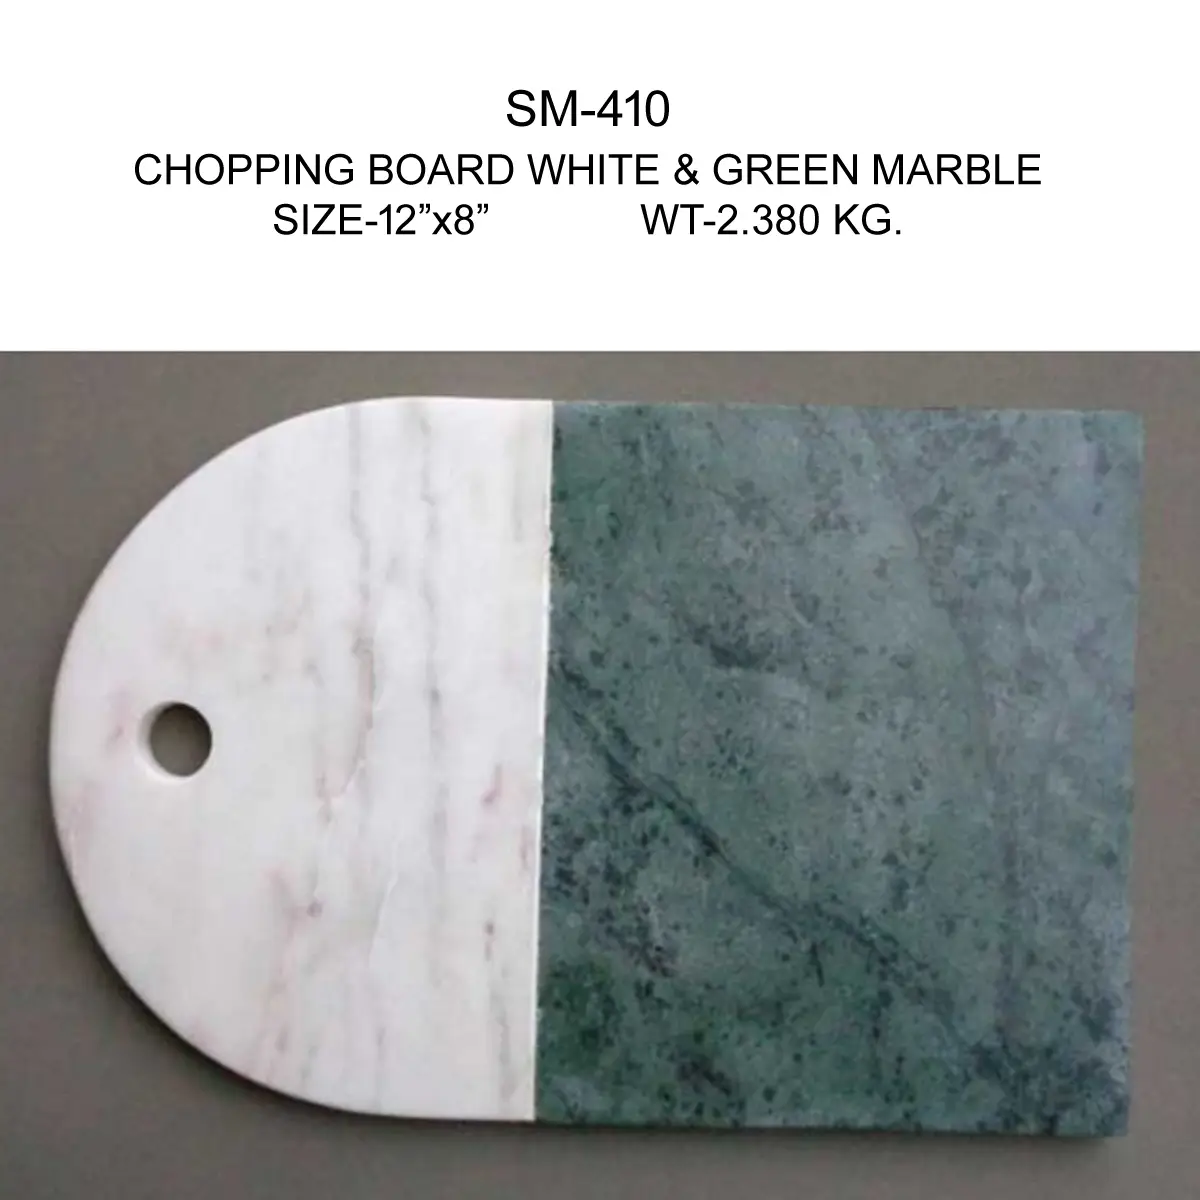 CHOPPING BOARD WHITE AND GREEN
MARBLE